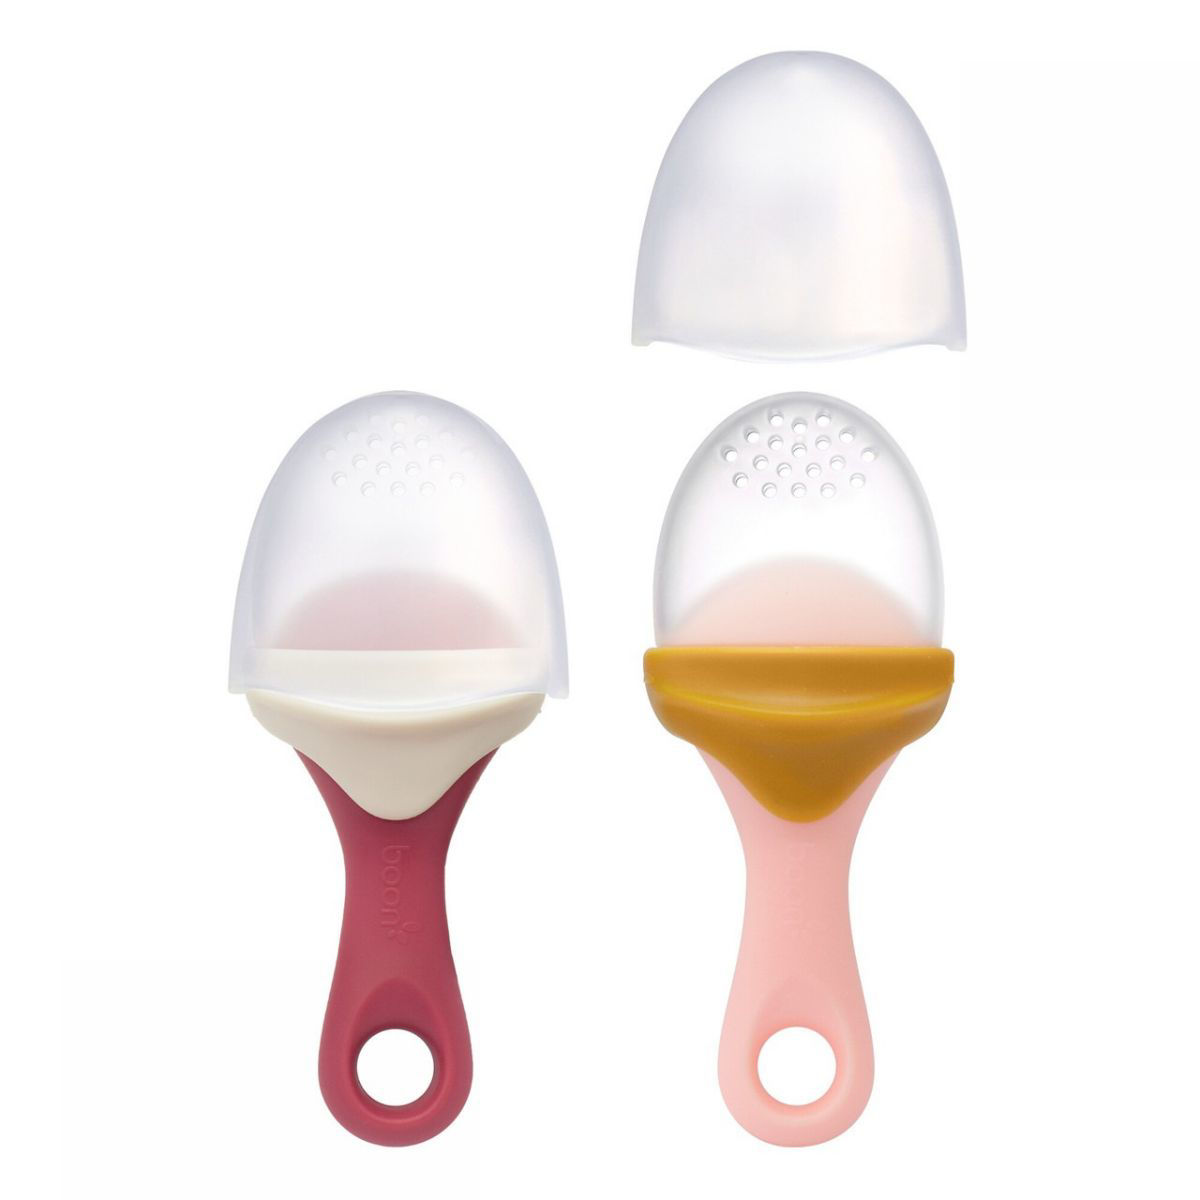 https://www.babyfurnitureplus.net/images/thumbs/0051493_pulp-silicone-feeder-2-pack-pink-mauve-by-boon.jpeg